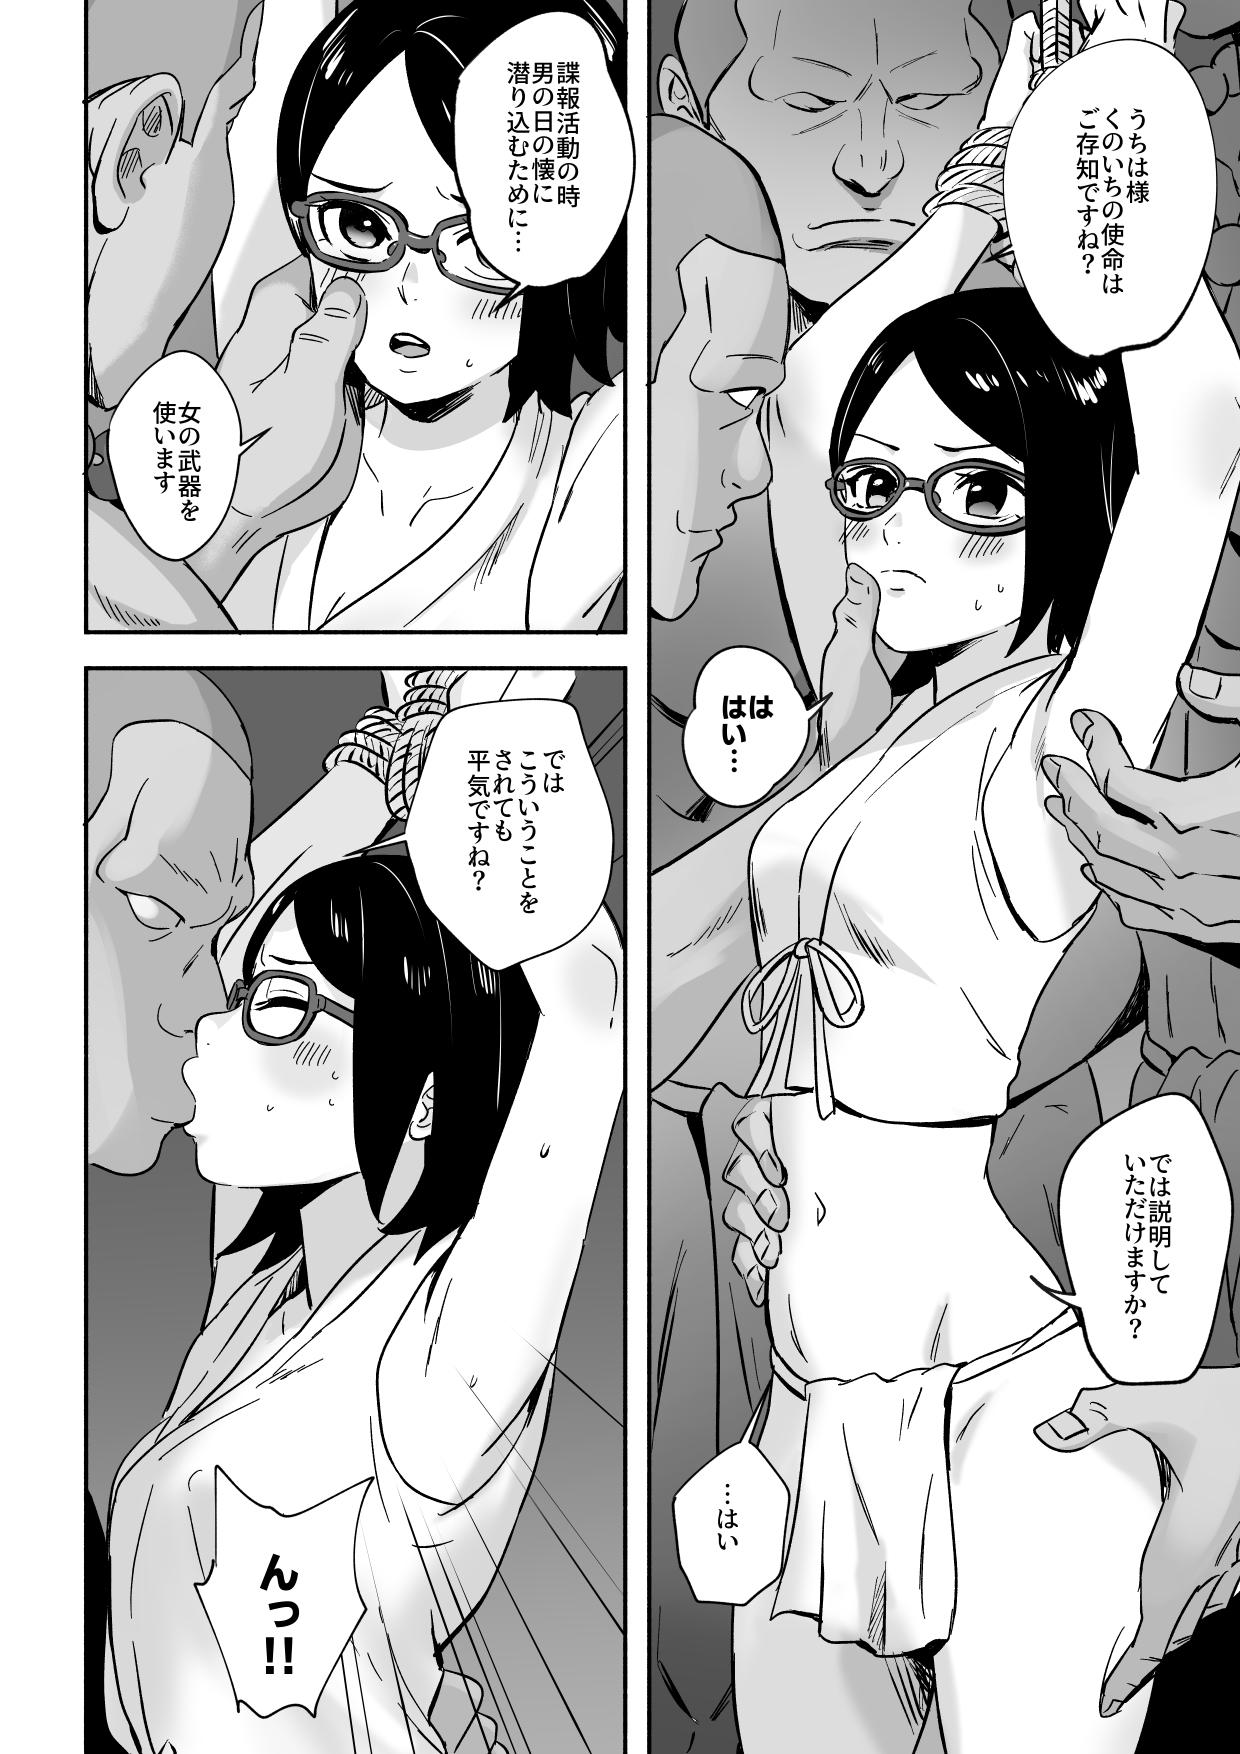 Dando A book about training and tricking Sarada-chan, who had her chakra sealed, into doing erotic things - Naruto Boruto Beauty - Page 6